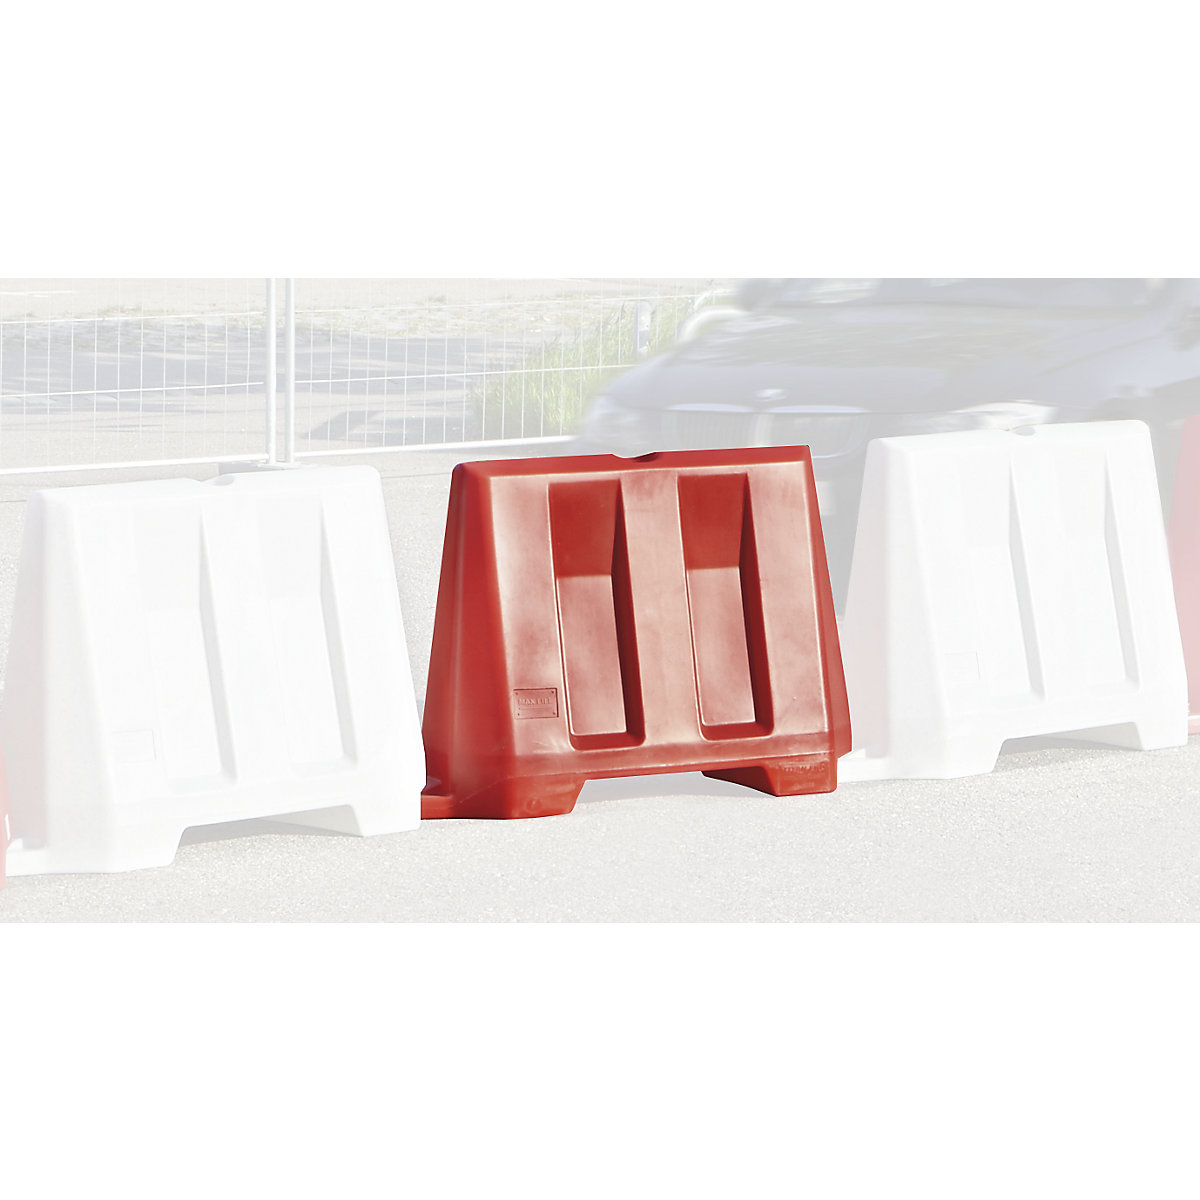 Roadway barrier, LxWxH 1210 x 400 x 810 mm, red-7